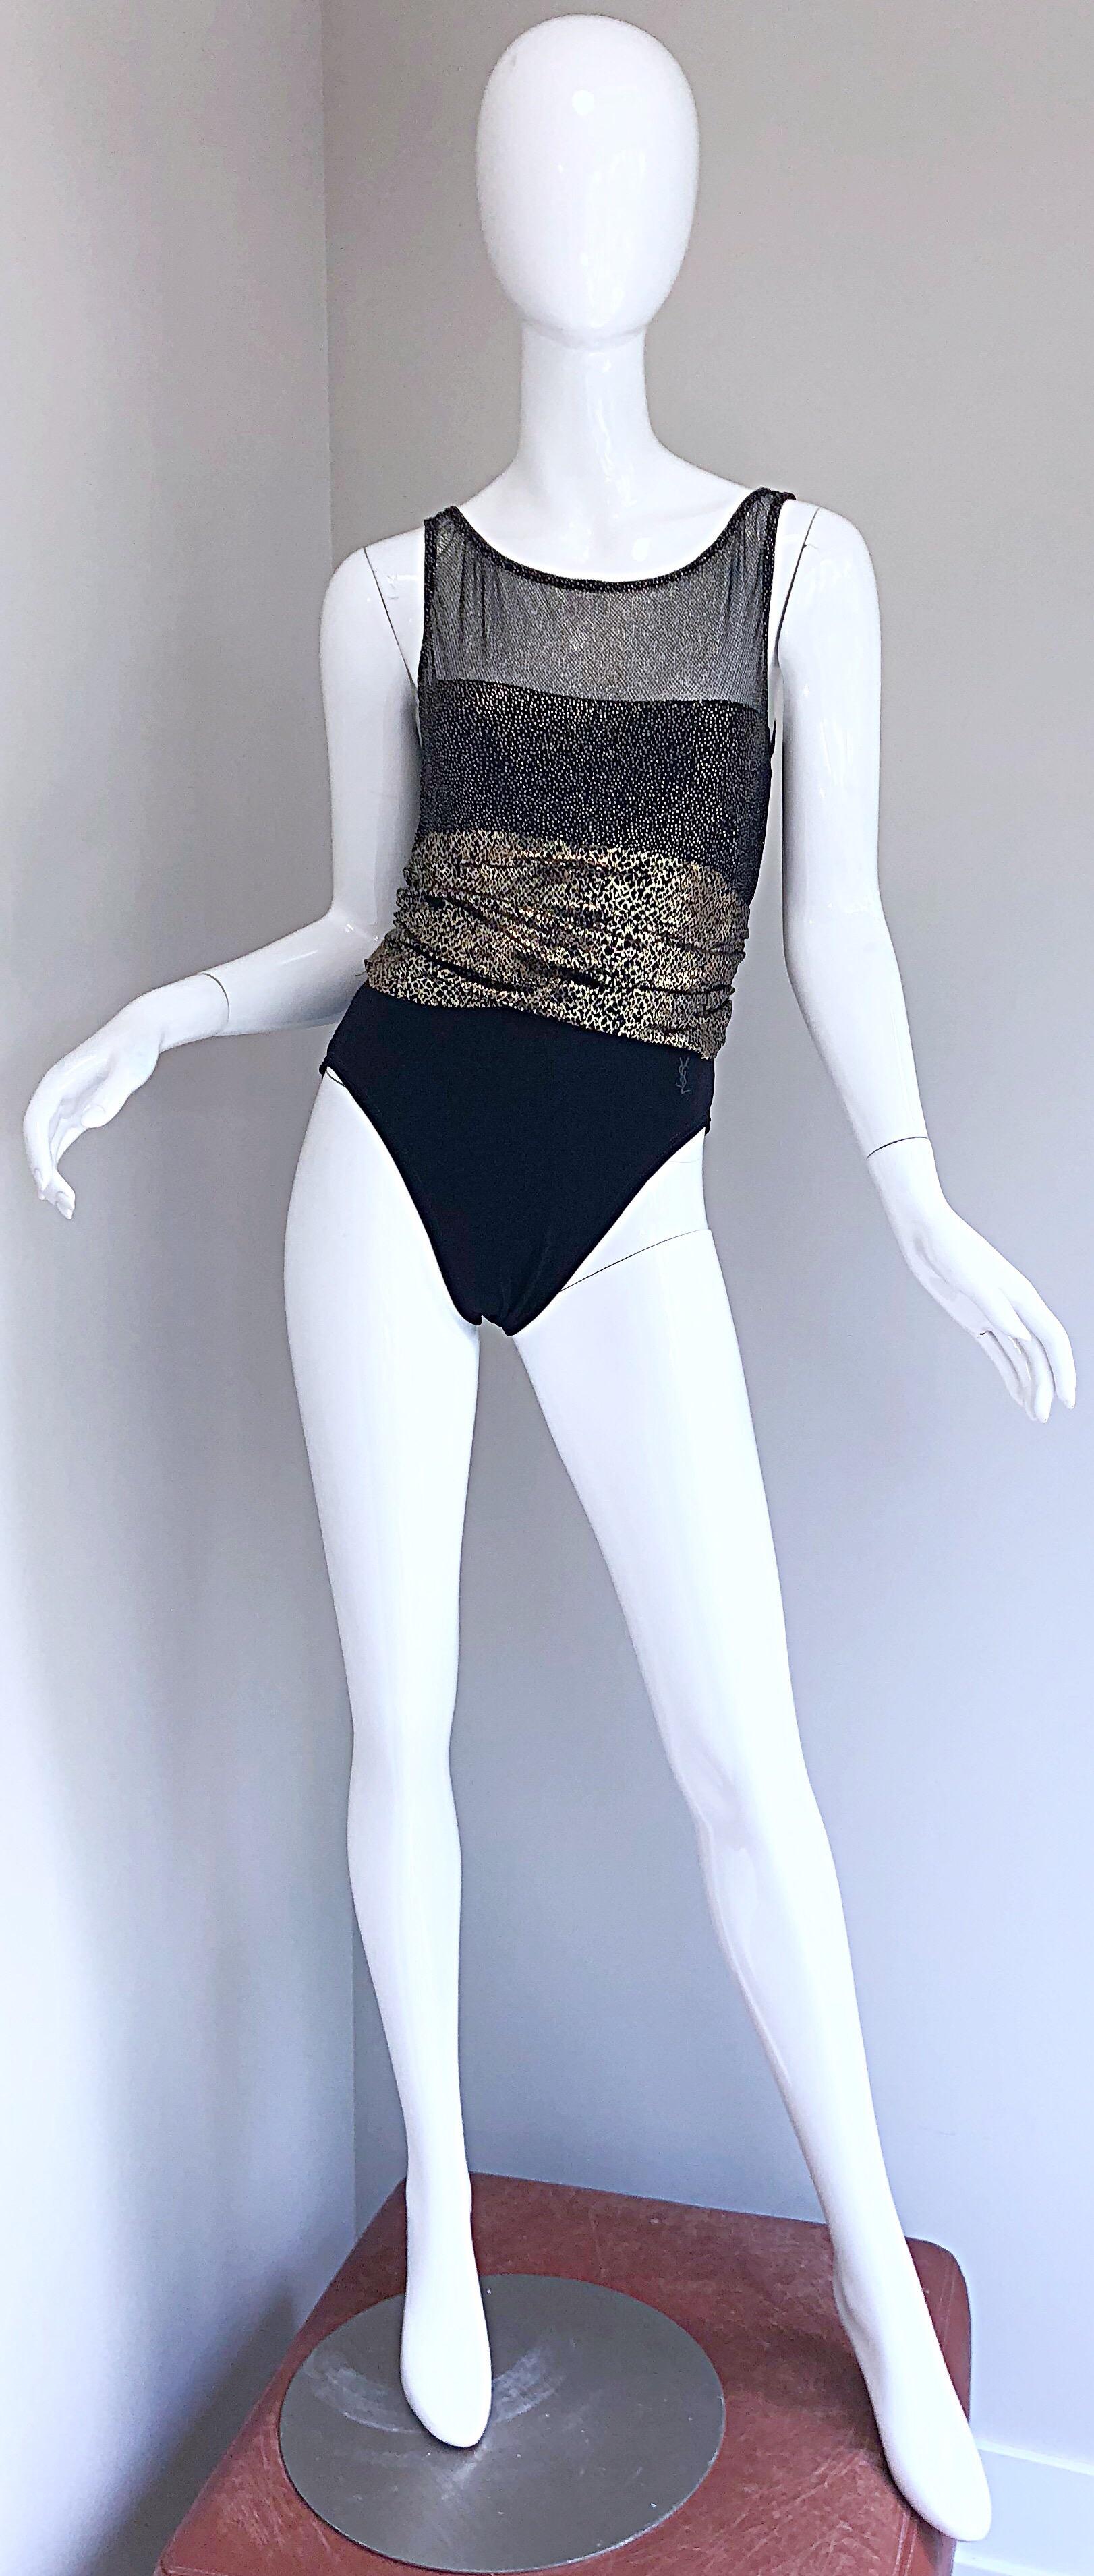 Sexy vintage YVES SAINT LAURENT black and gold metallic nude illusion one piece swimsuit or bodysuit! Features black on the bottom with the YSL logo emobssed at left hip. Black and gold snakeskin printed ruched waist is very flattering. Black and